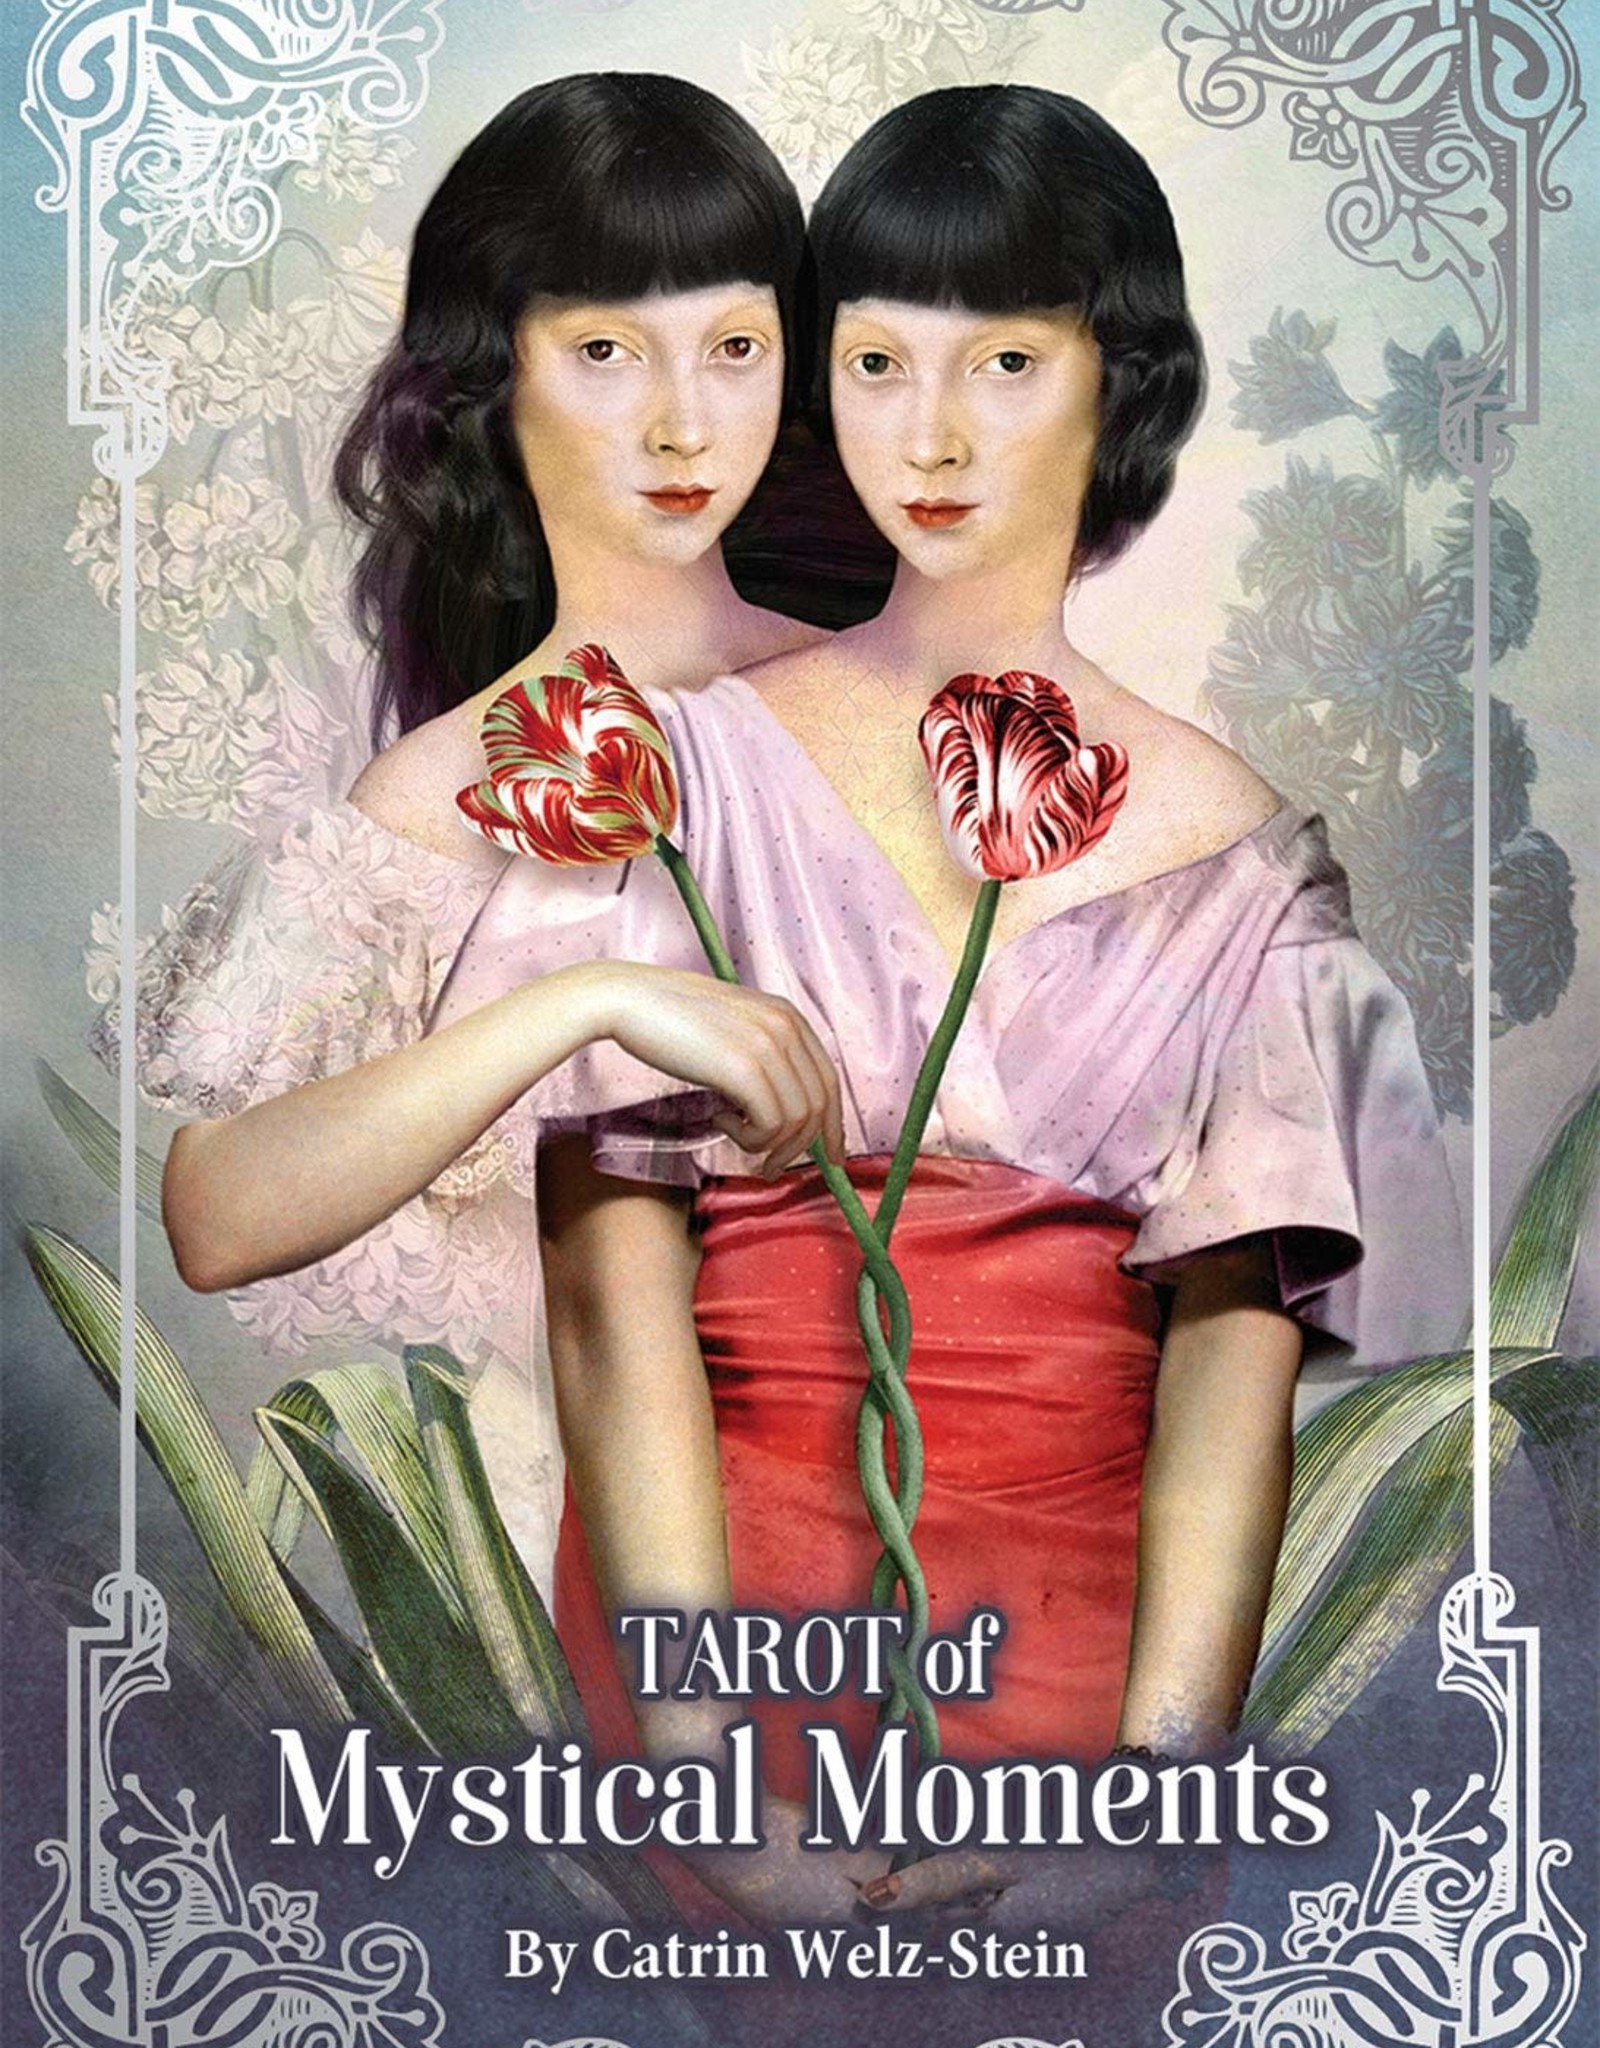 US GAMES SYSTEMS Tarot of Mystical Moments